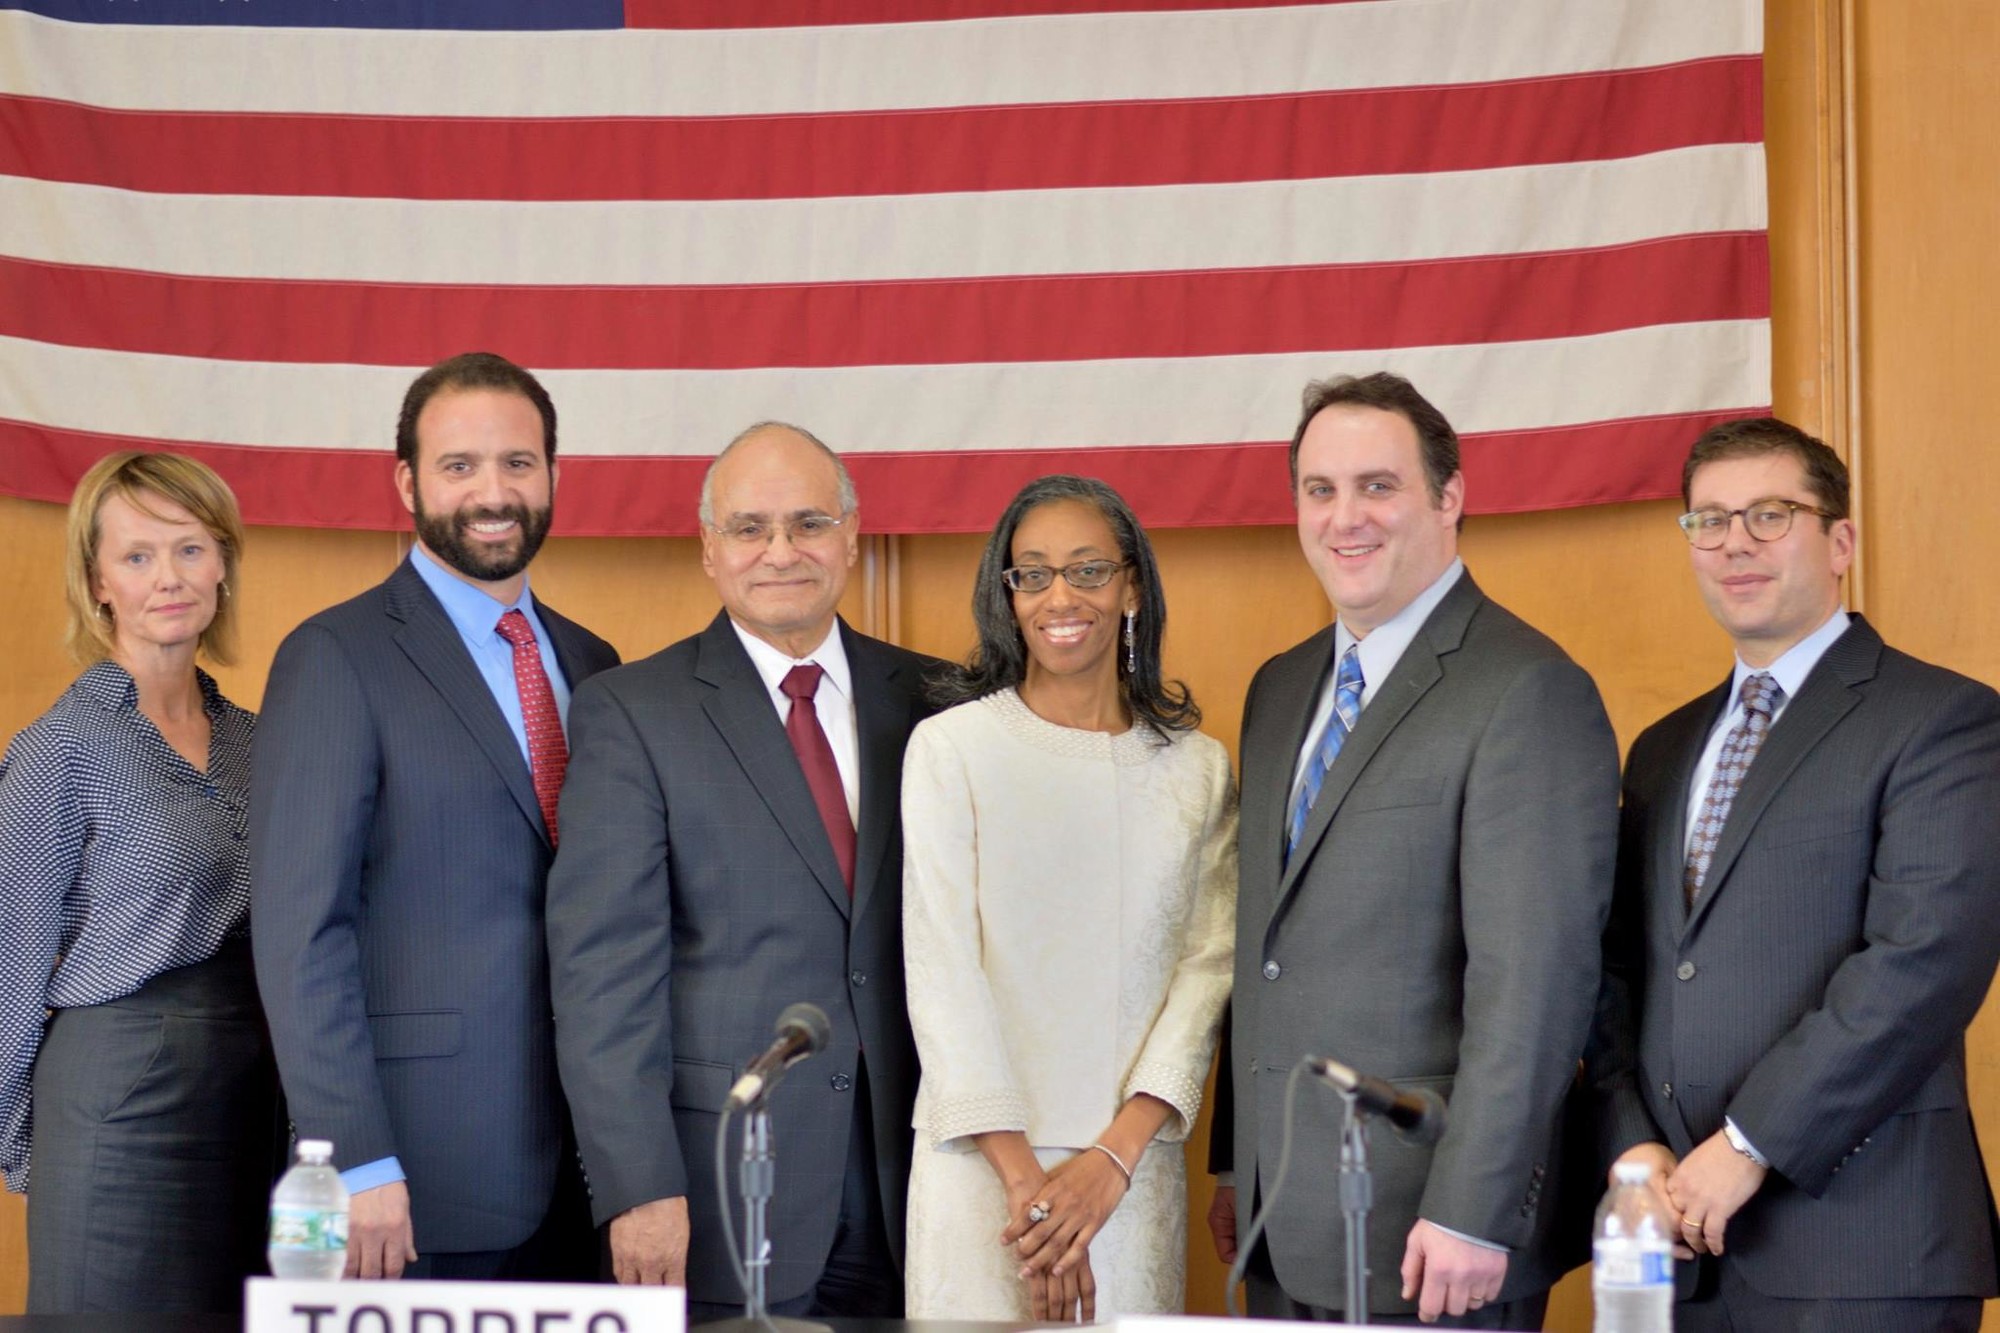 City Council members Eileen Goggin, far left, Anthony Eramo, Len Torres, Anissa Moore, Scott Mandel, and City Manager Jack Schnirman. Goggin was not present at Tuesday's meeting. (Photo courtesy City of Long Beach)